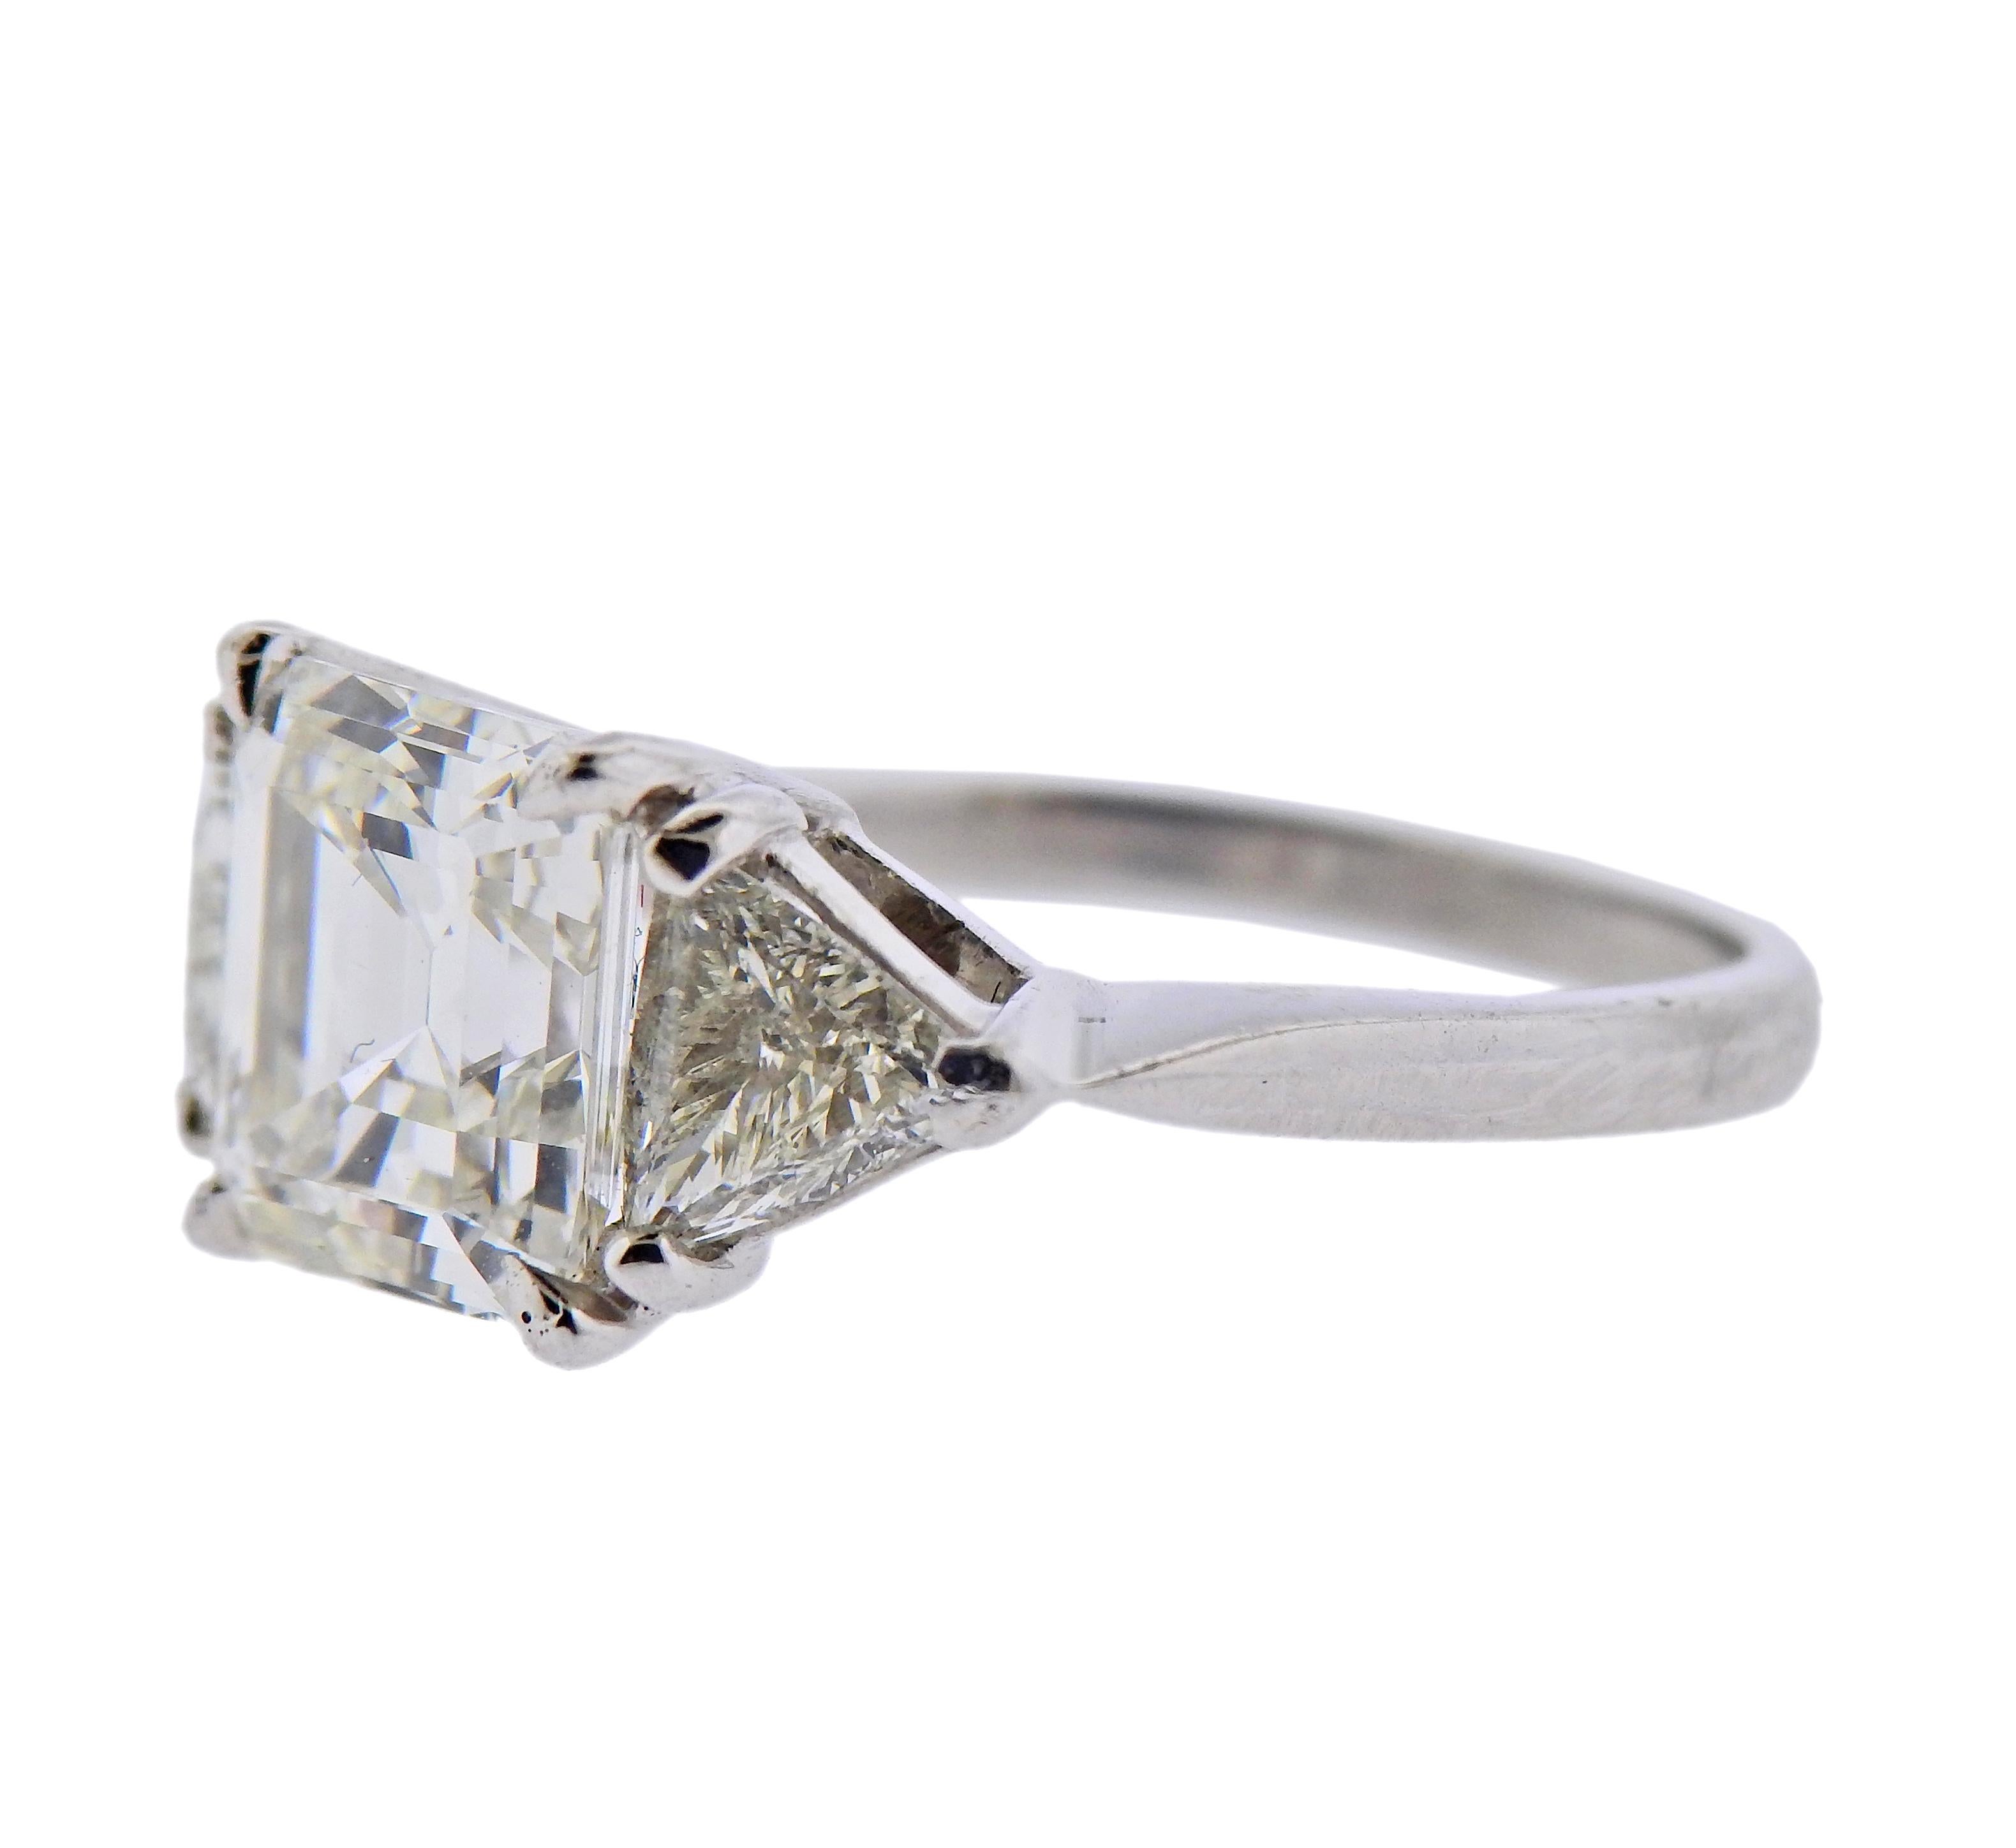 Platinum engagement ring, with center approx. 3.15ct I VS1 diamond, and side two trillion diamonds - 1.10cts. Ring size - 6.5, ring top is 9mm wide. 